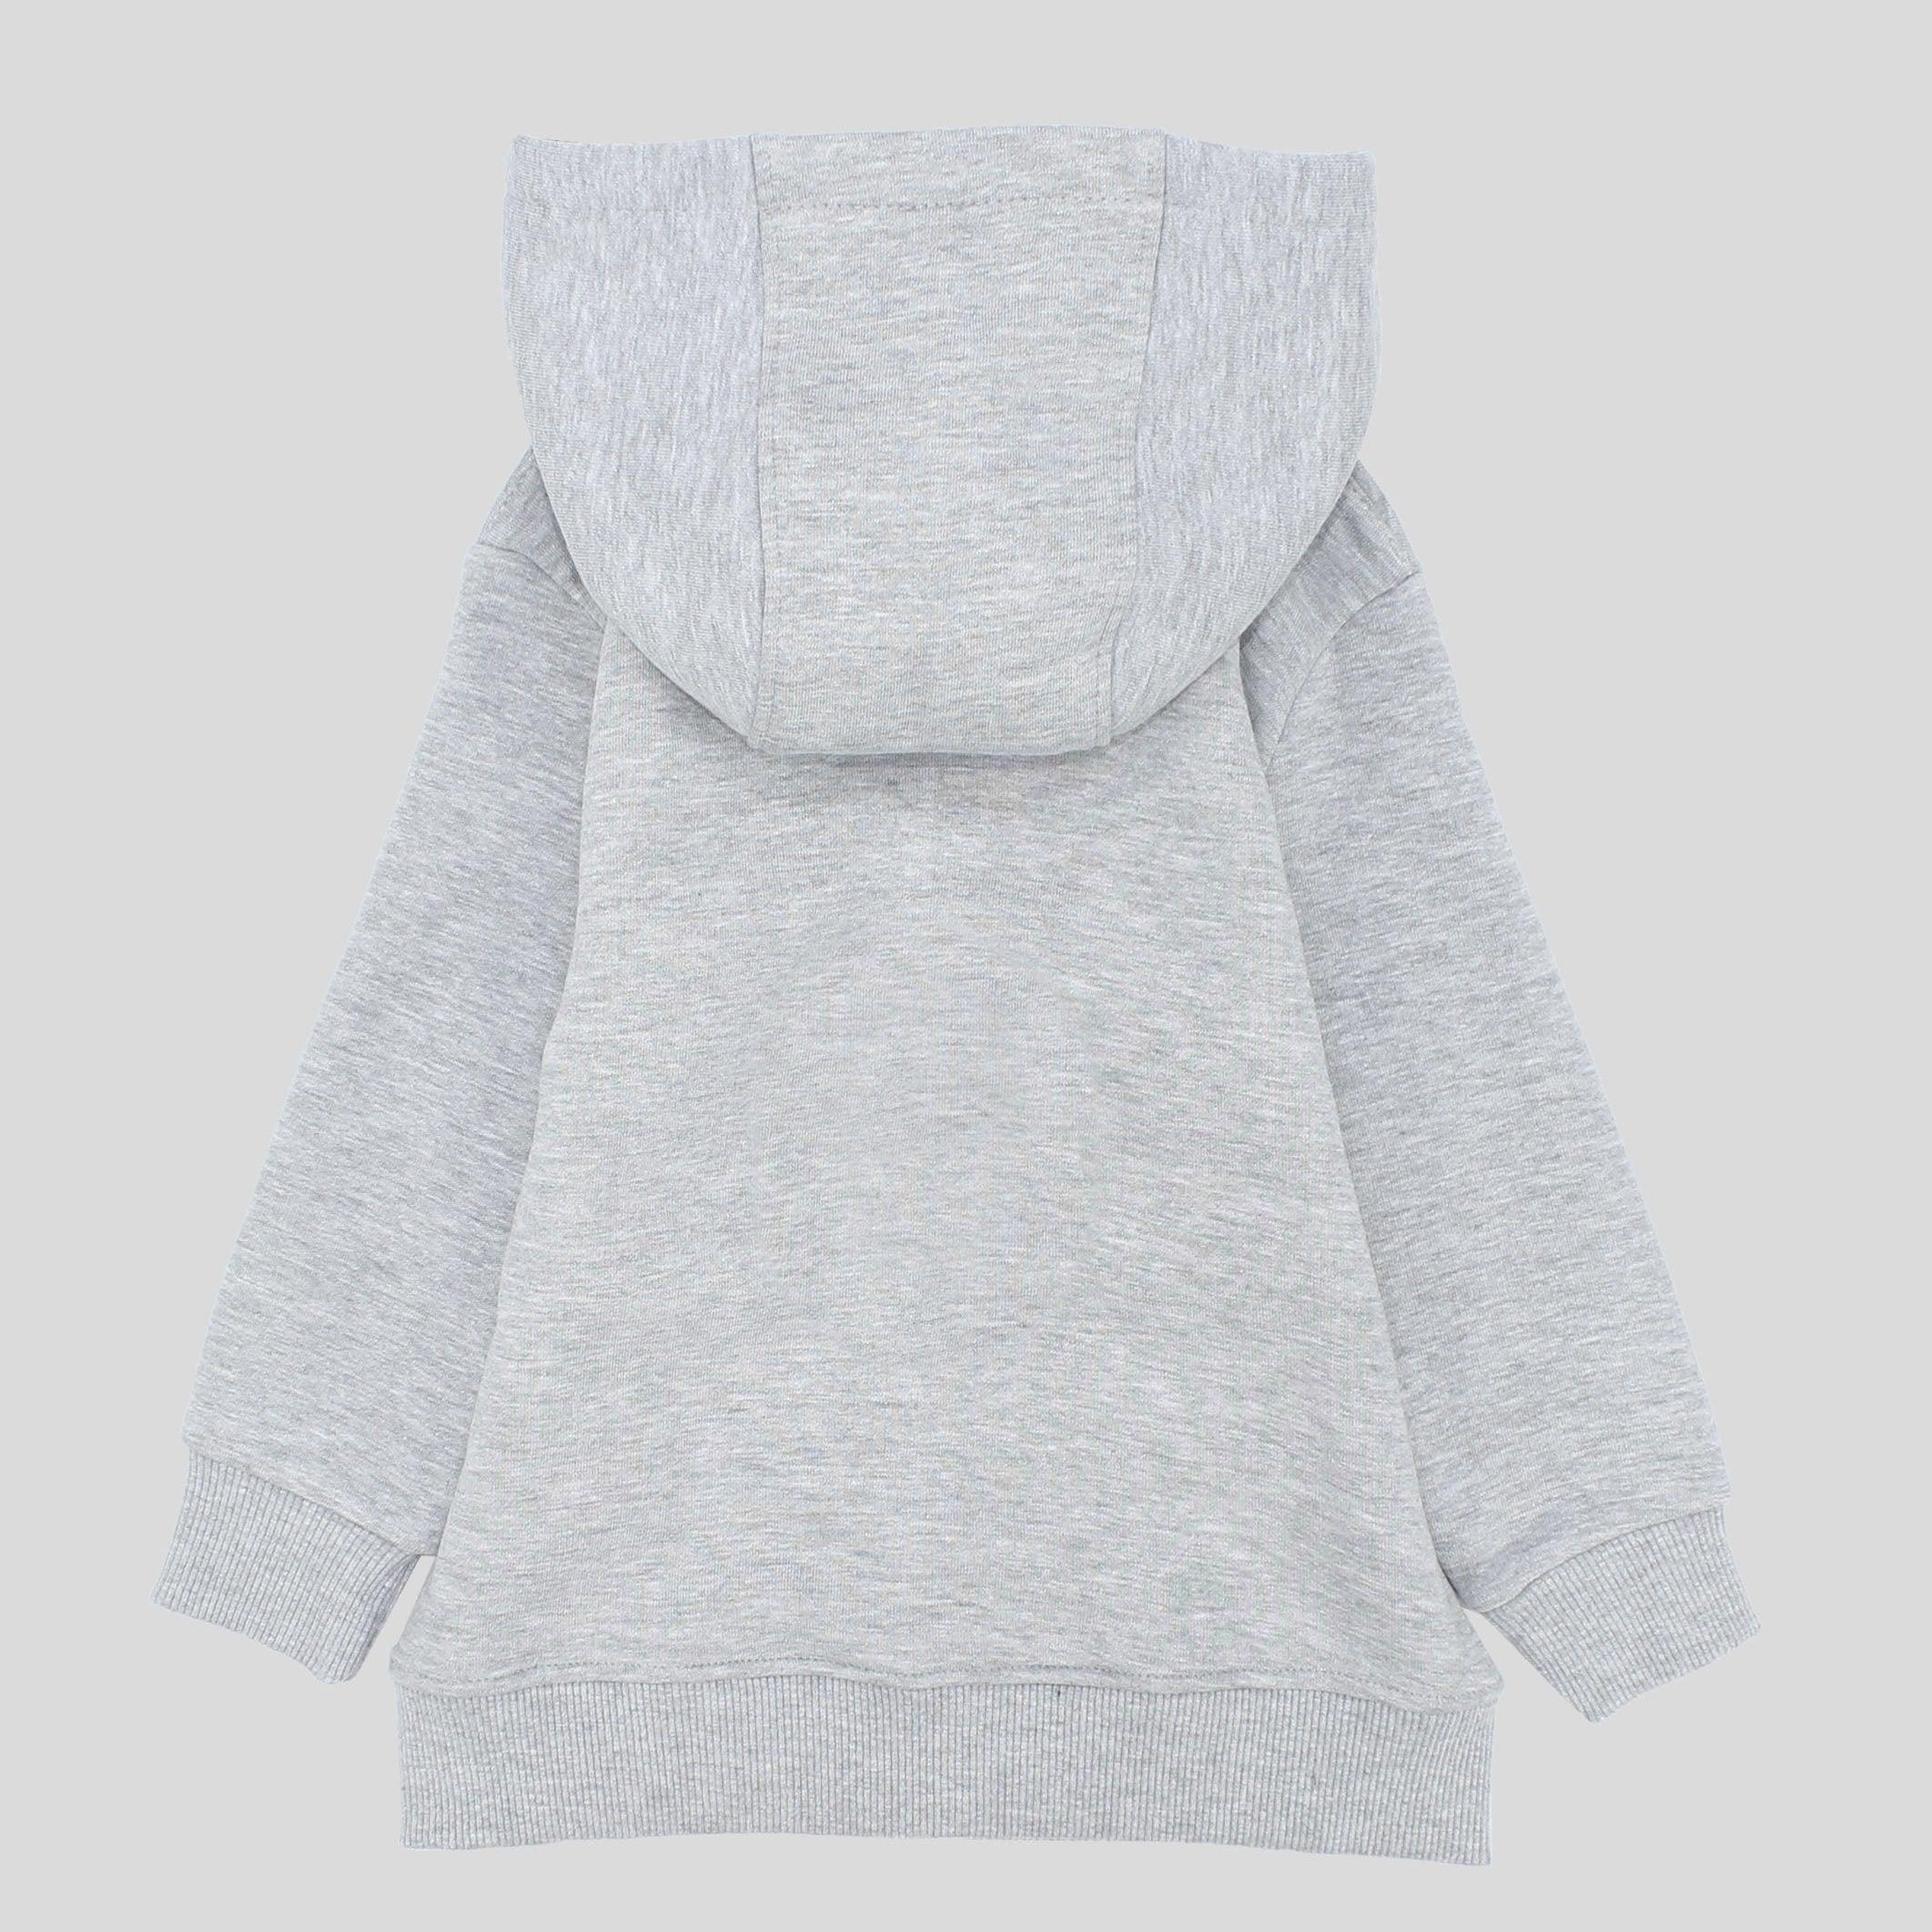 Grey Long-Sleeved Zip-Up Hoodie - Ourkids - Ourkids